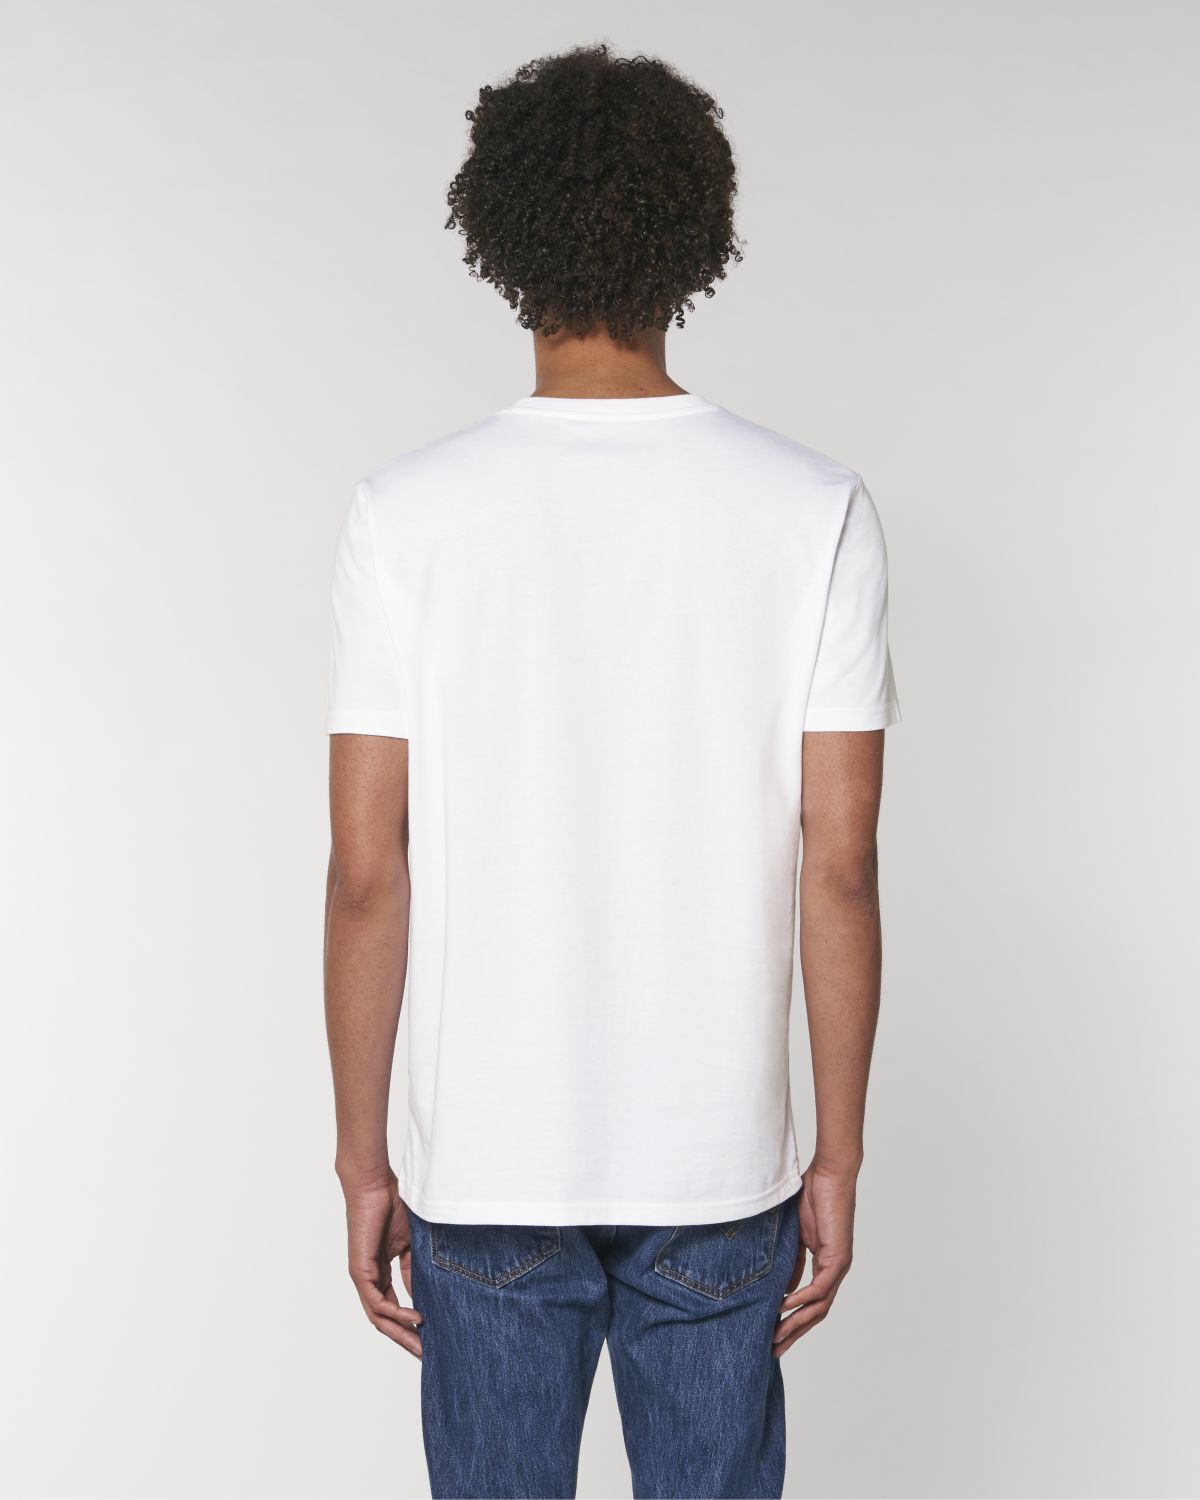 T-Shirt Homme JUST SAY SNOW Blanc - DP